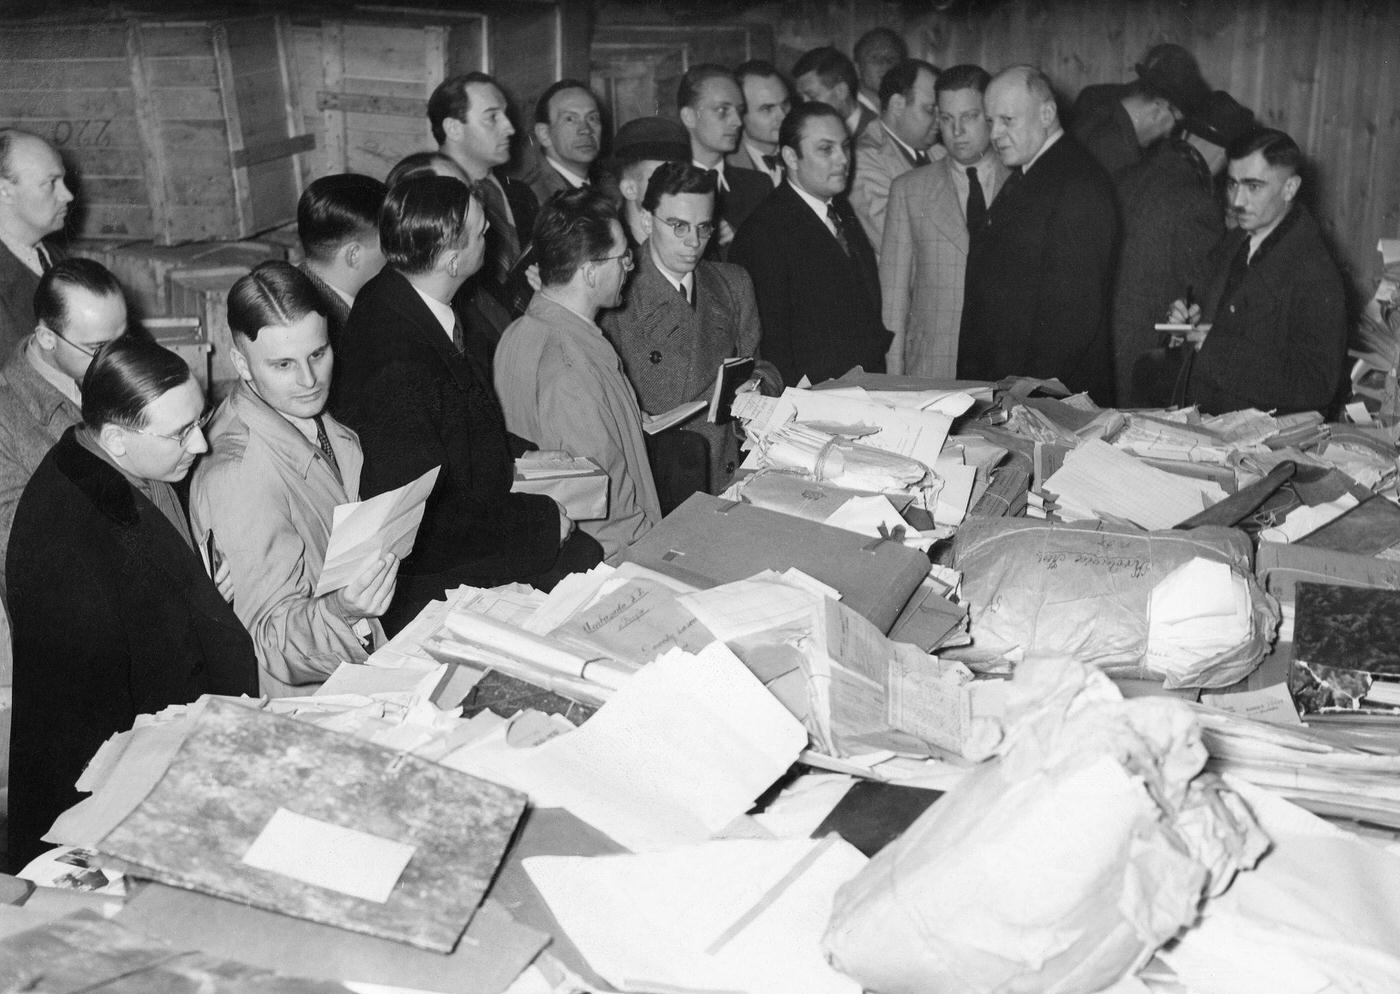 This photograph shows journalists examining documents belonging to the Polish secret service that were captured at the Polish Ministry of Foreign Affairs in Warsaw.